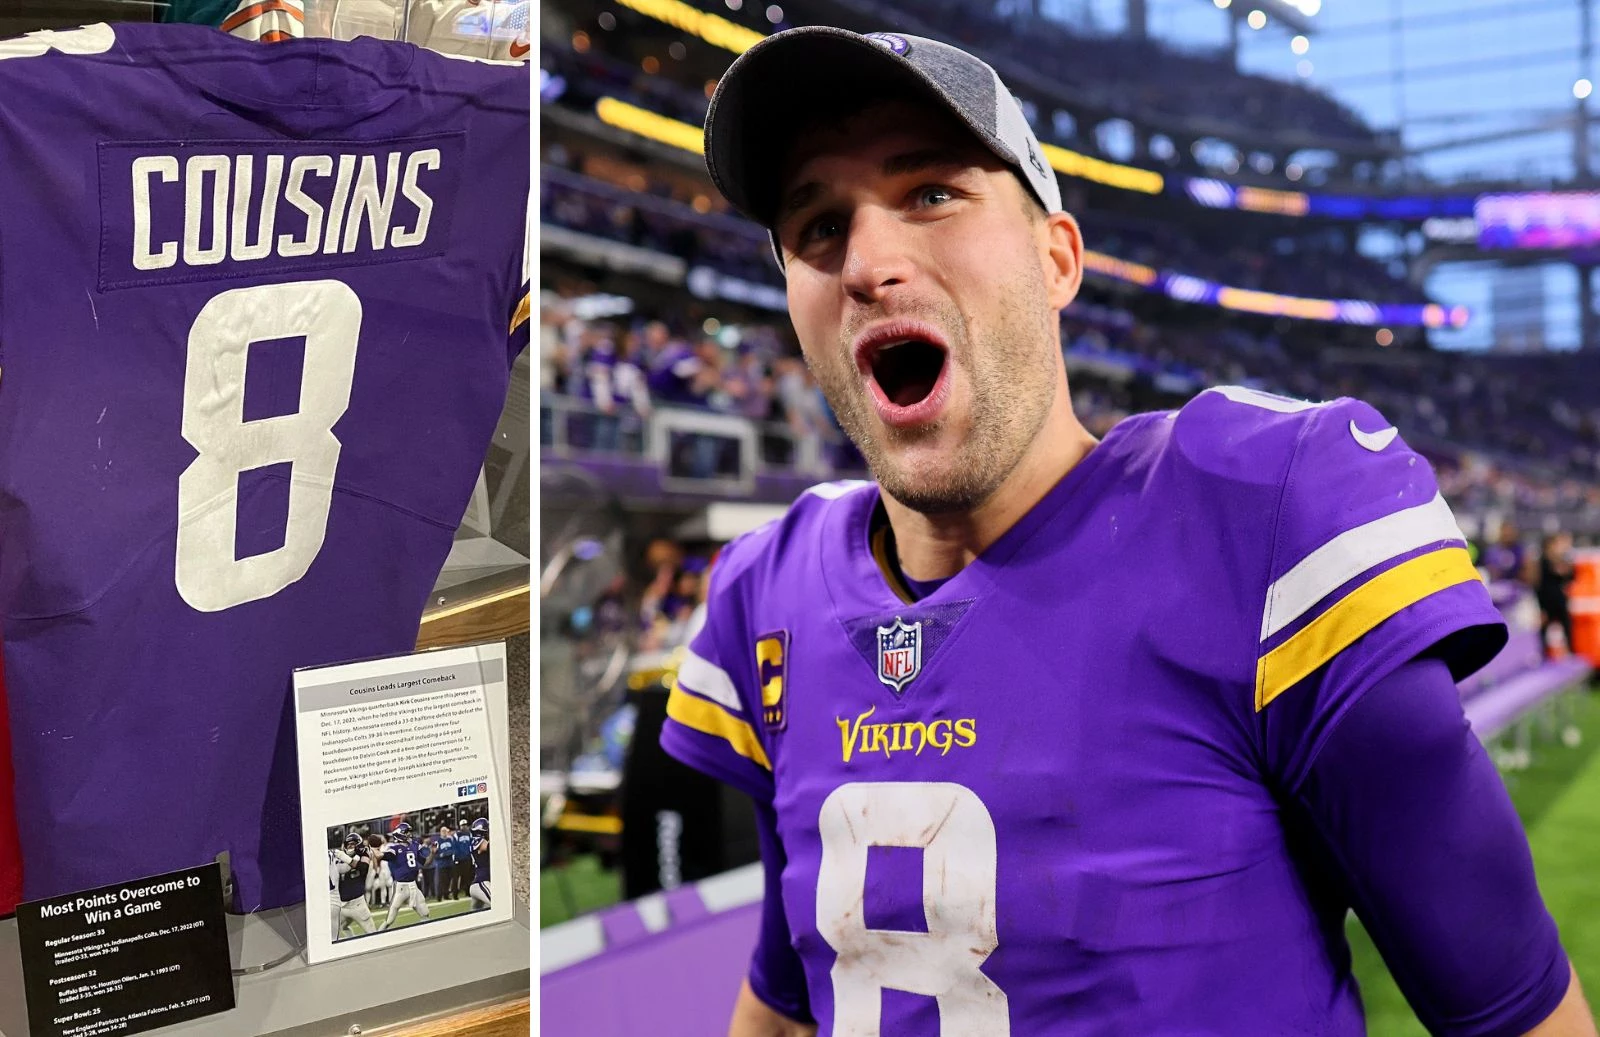 Vikings seal biggest comeback in NFL HISTORY from 33-0 down at